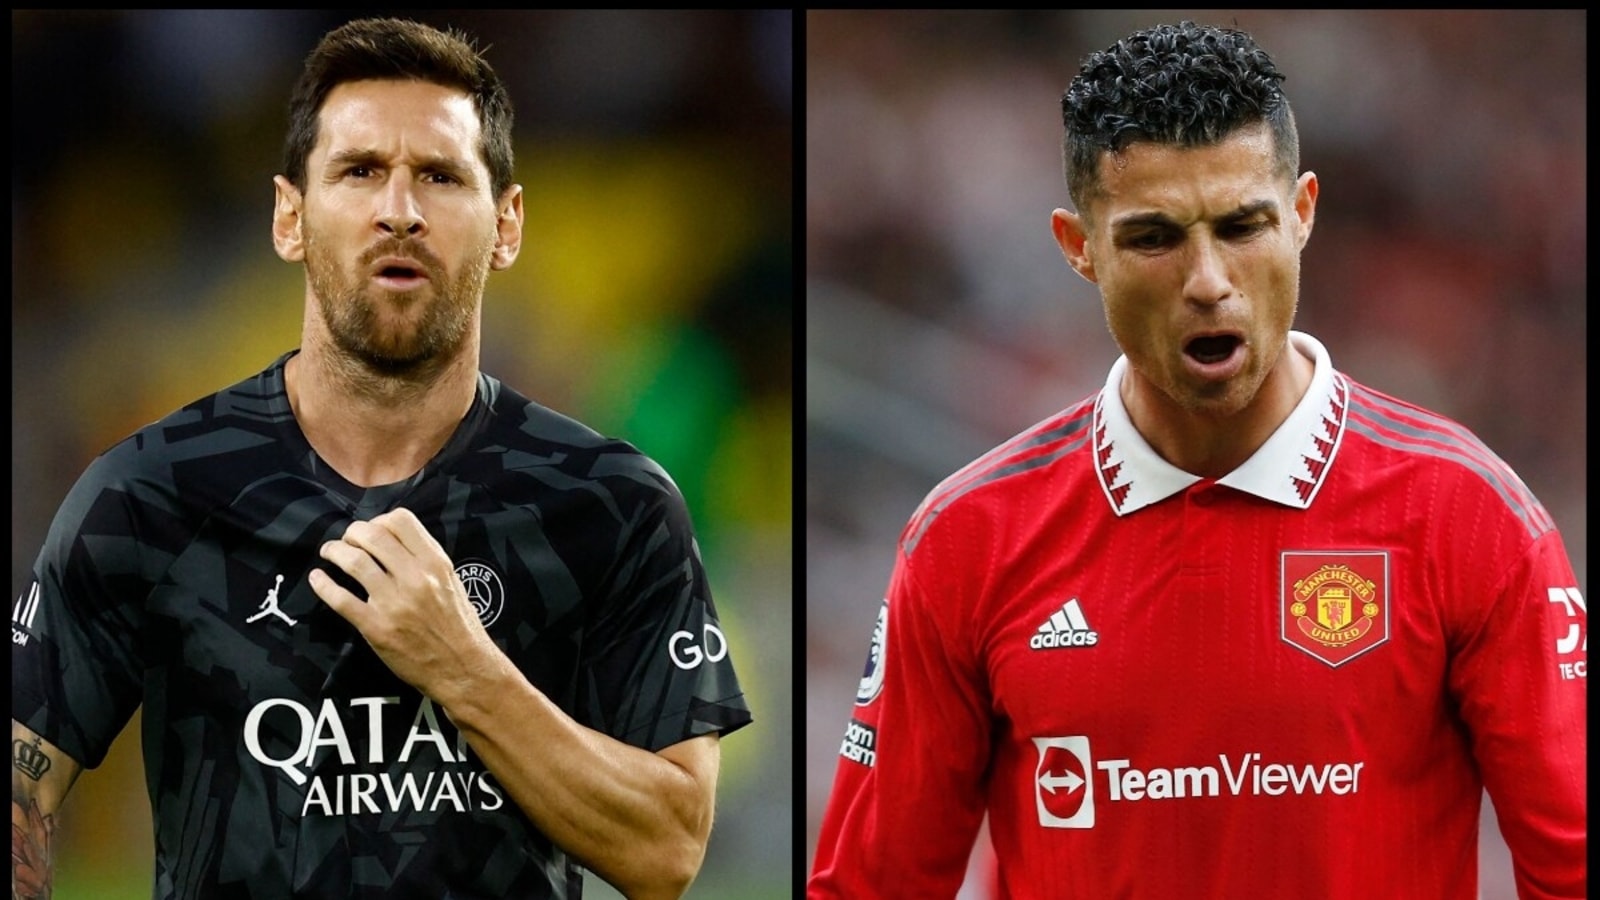 Cristiano Ronaldo vs Lionel Messi in Champions League goals: How many have  the Juventus and Barcelona stars scored so far?